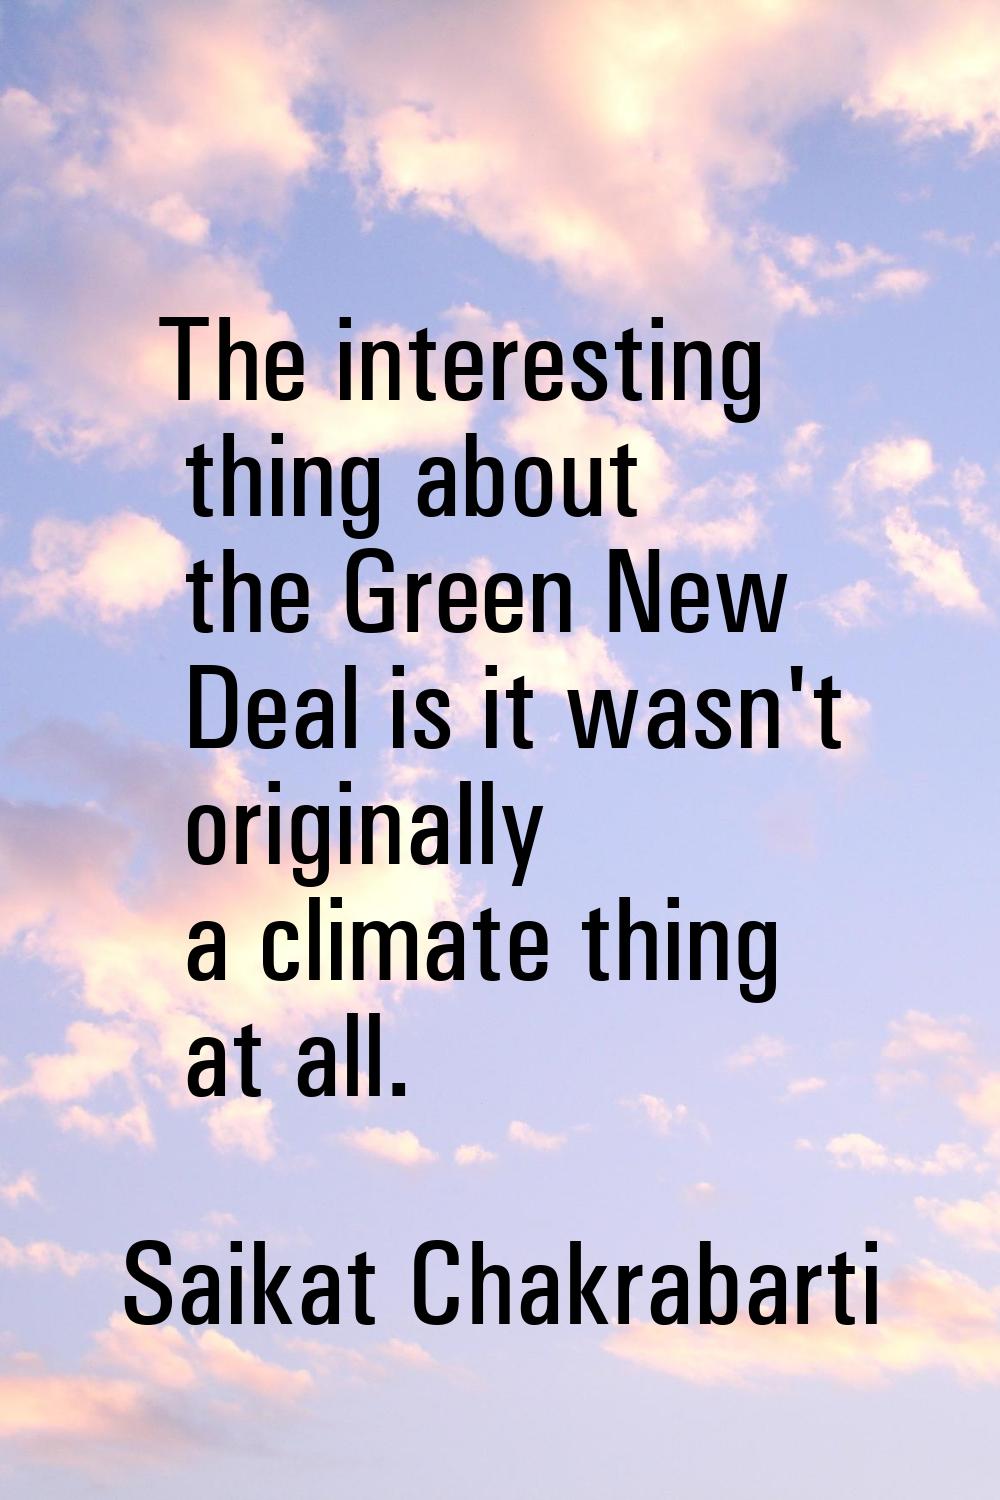 The interesting thing about the Green New Deal is it wasn't originally a climate thing at all.